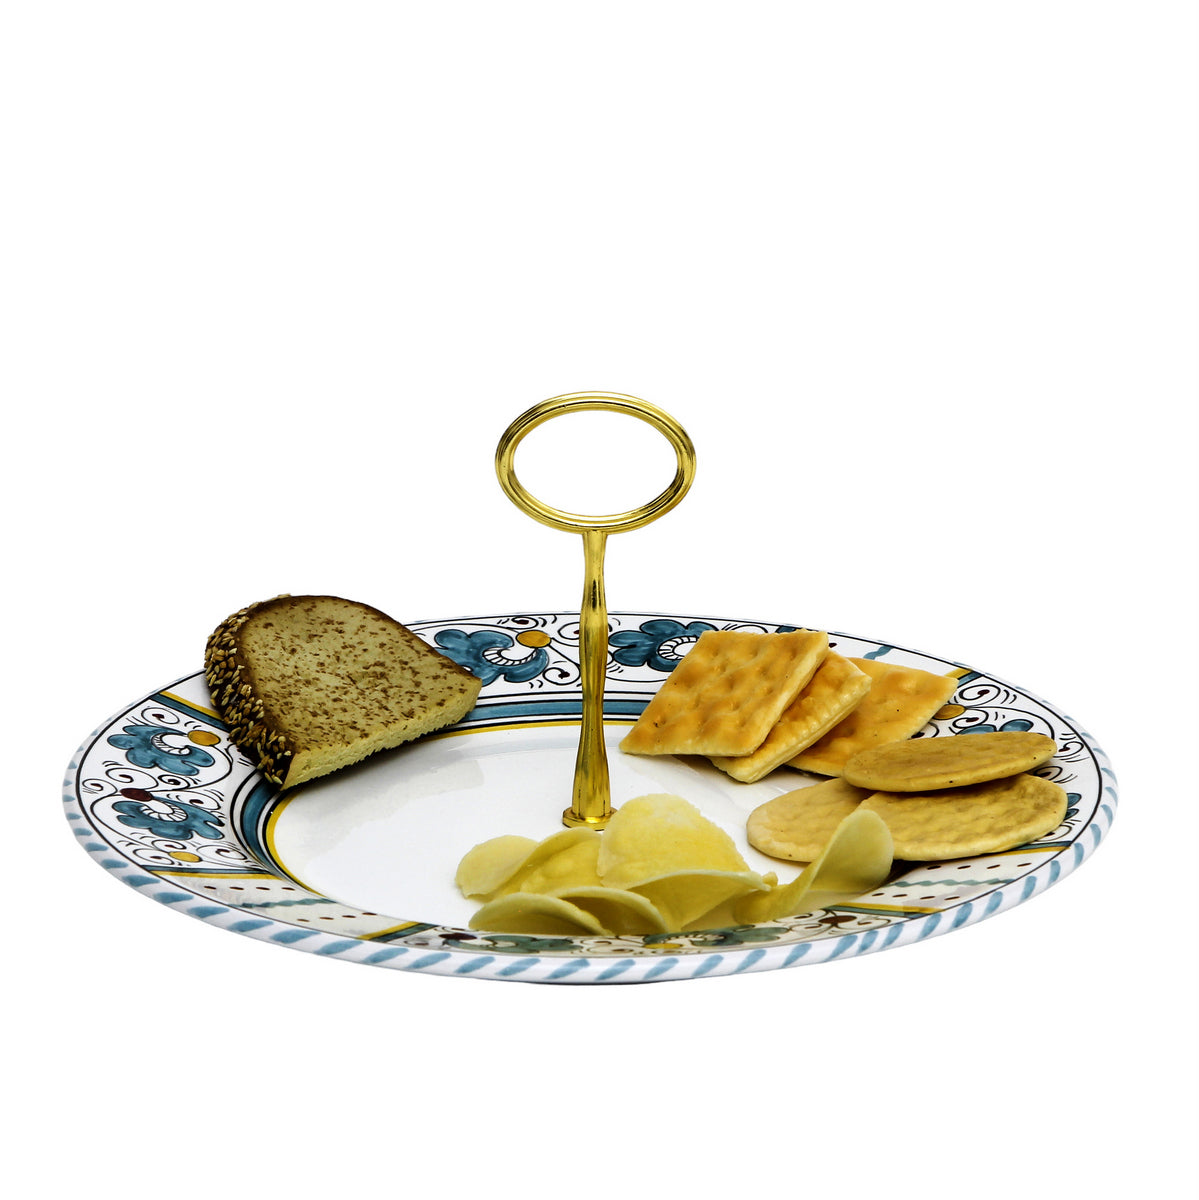 ORVIETO GREEN ROOSTER: Tid Bit Server Plate with Golden or Chrome Oval Metal Handle - Artistica.com